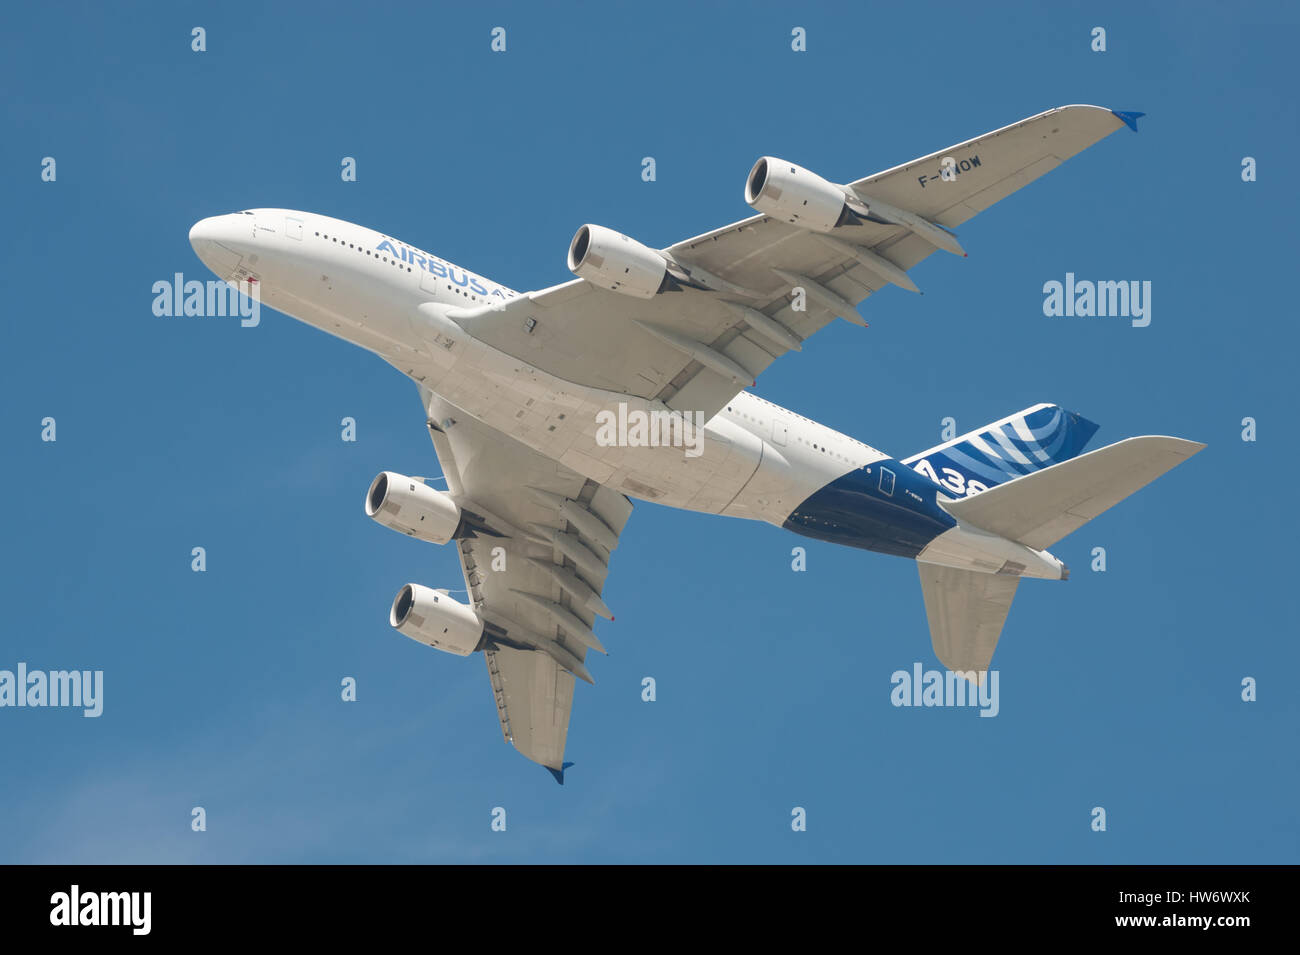 Closeup of an Airbus A380 super-jumbo jet airliner in the skies above Farnborough, Hampshire, UK Stock Photo